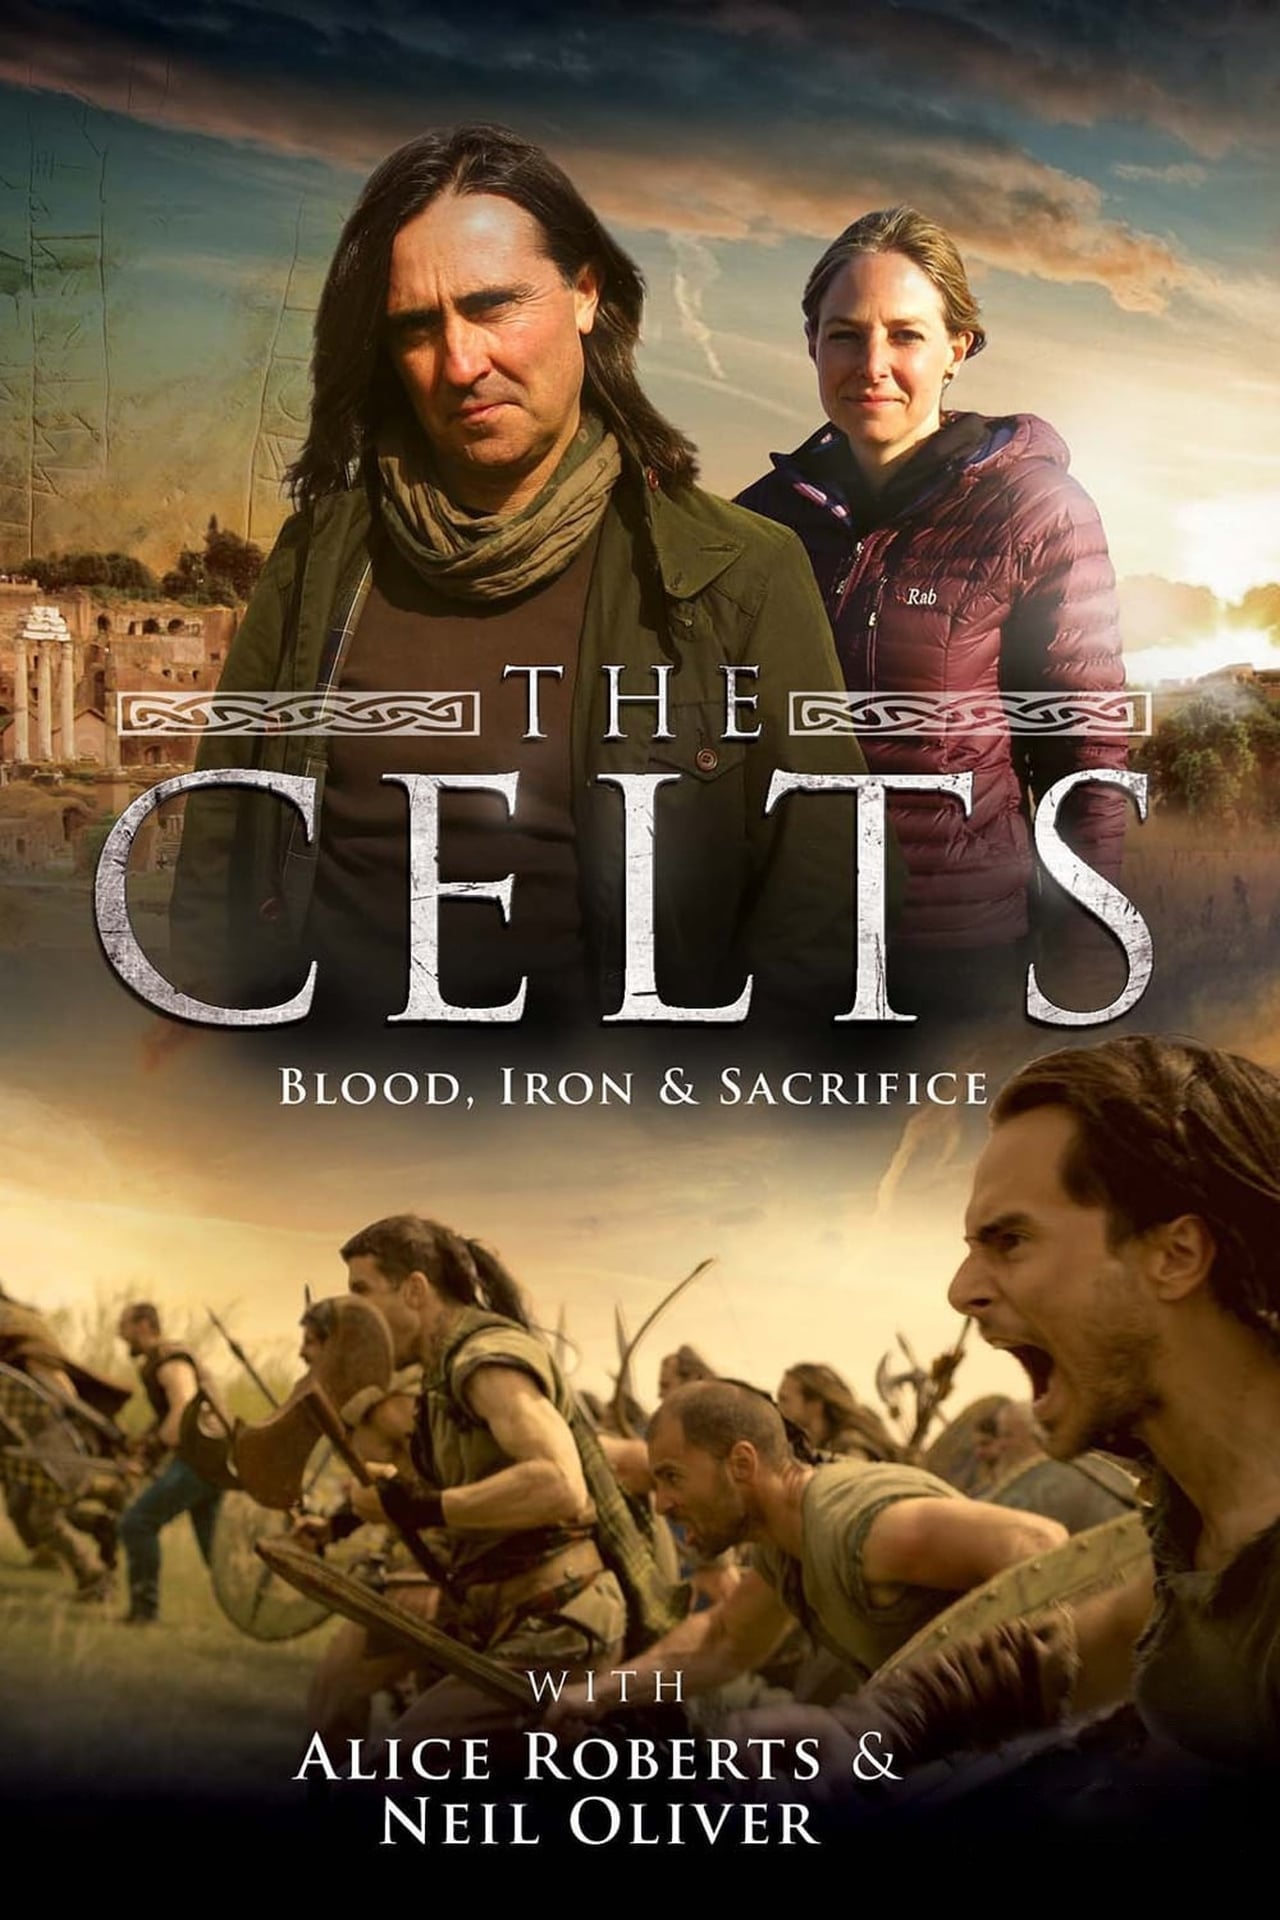 The Celts: Blood Iron & Sacrifice with Alice Roberts and Neil Oliver